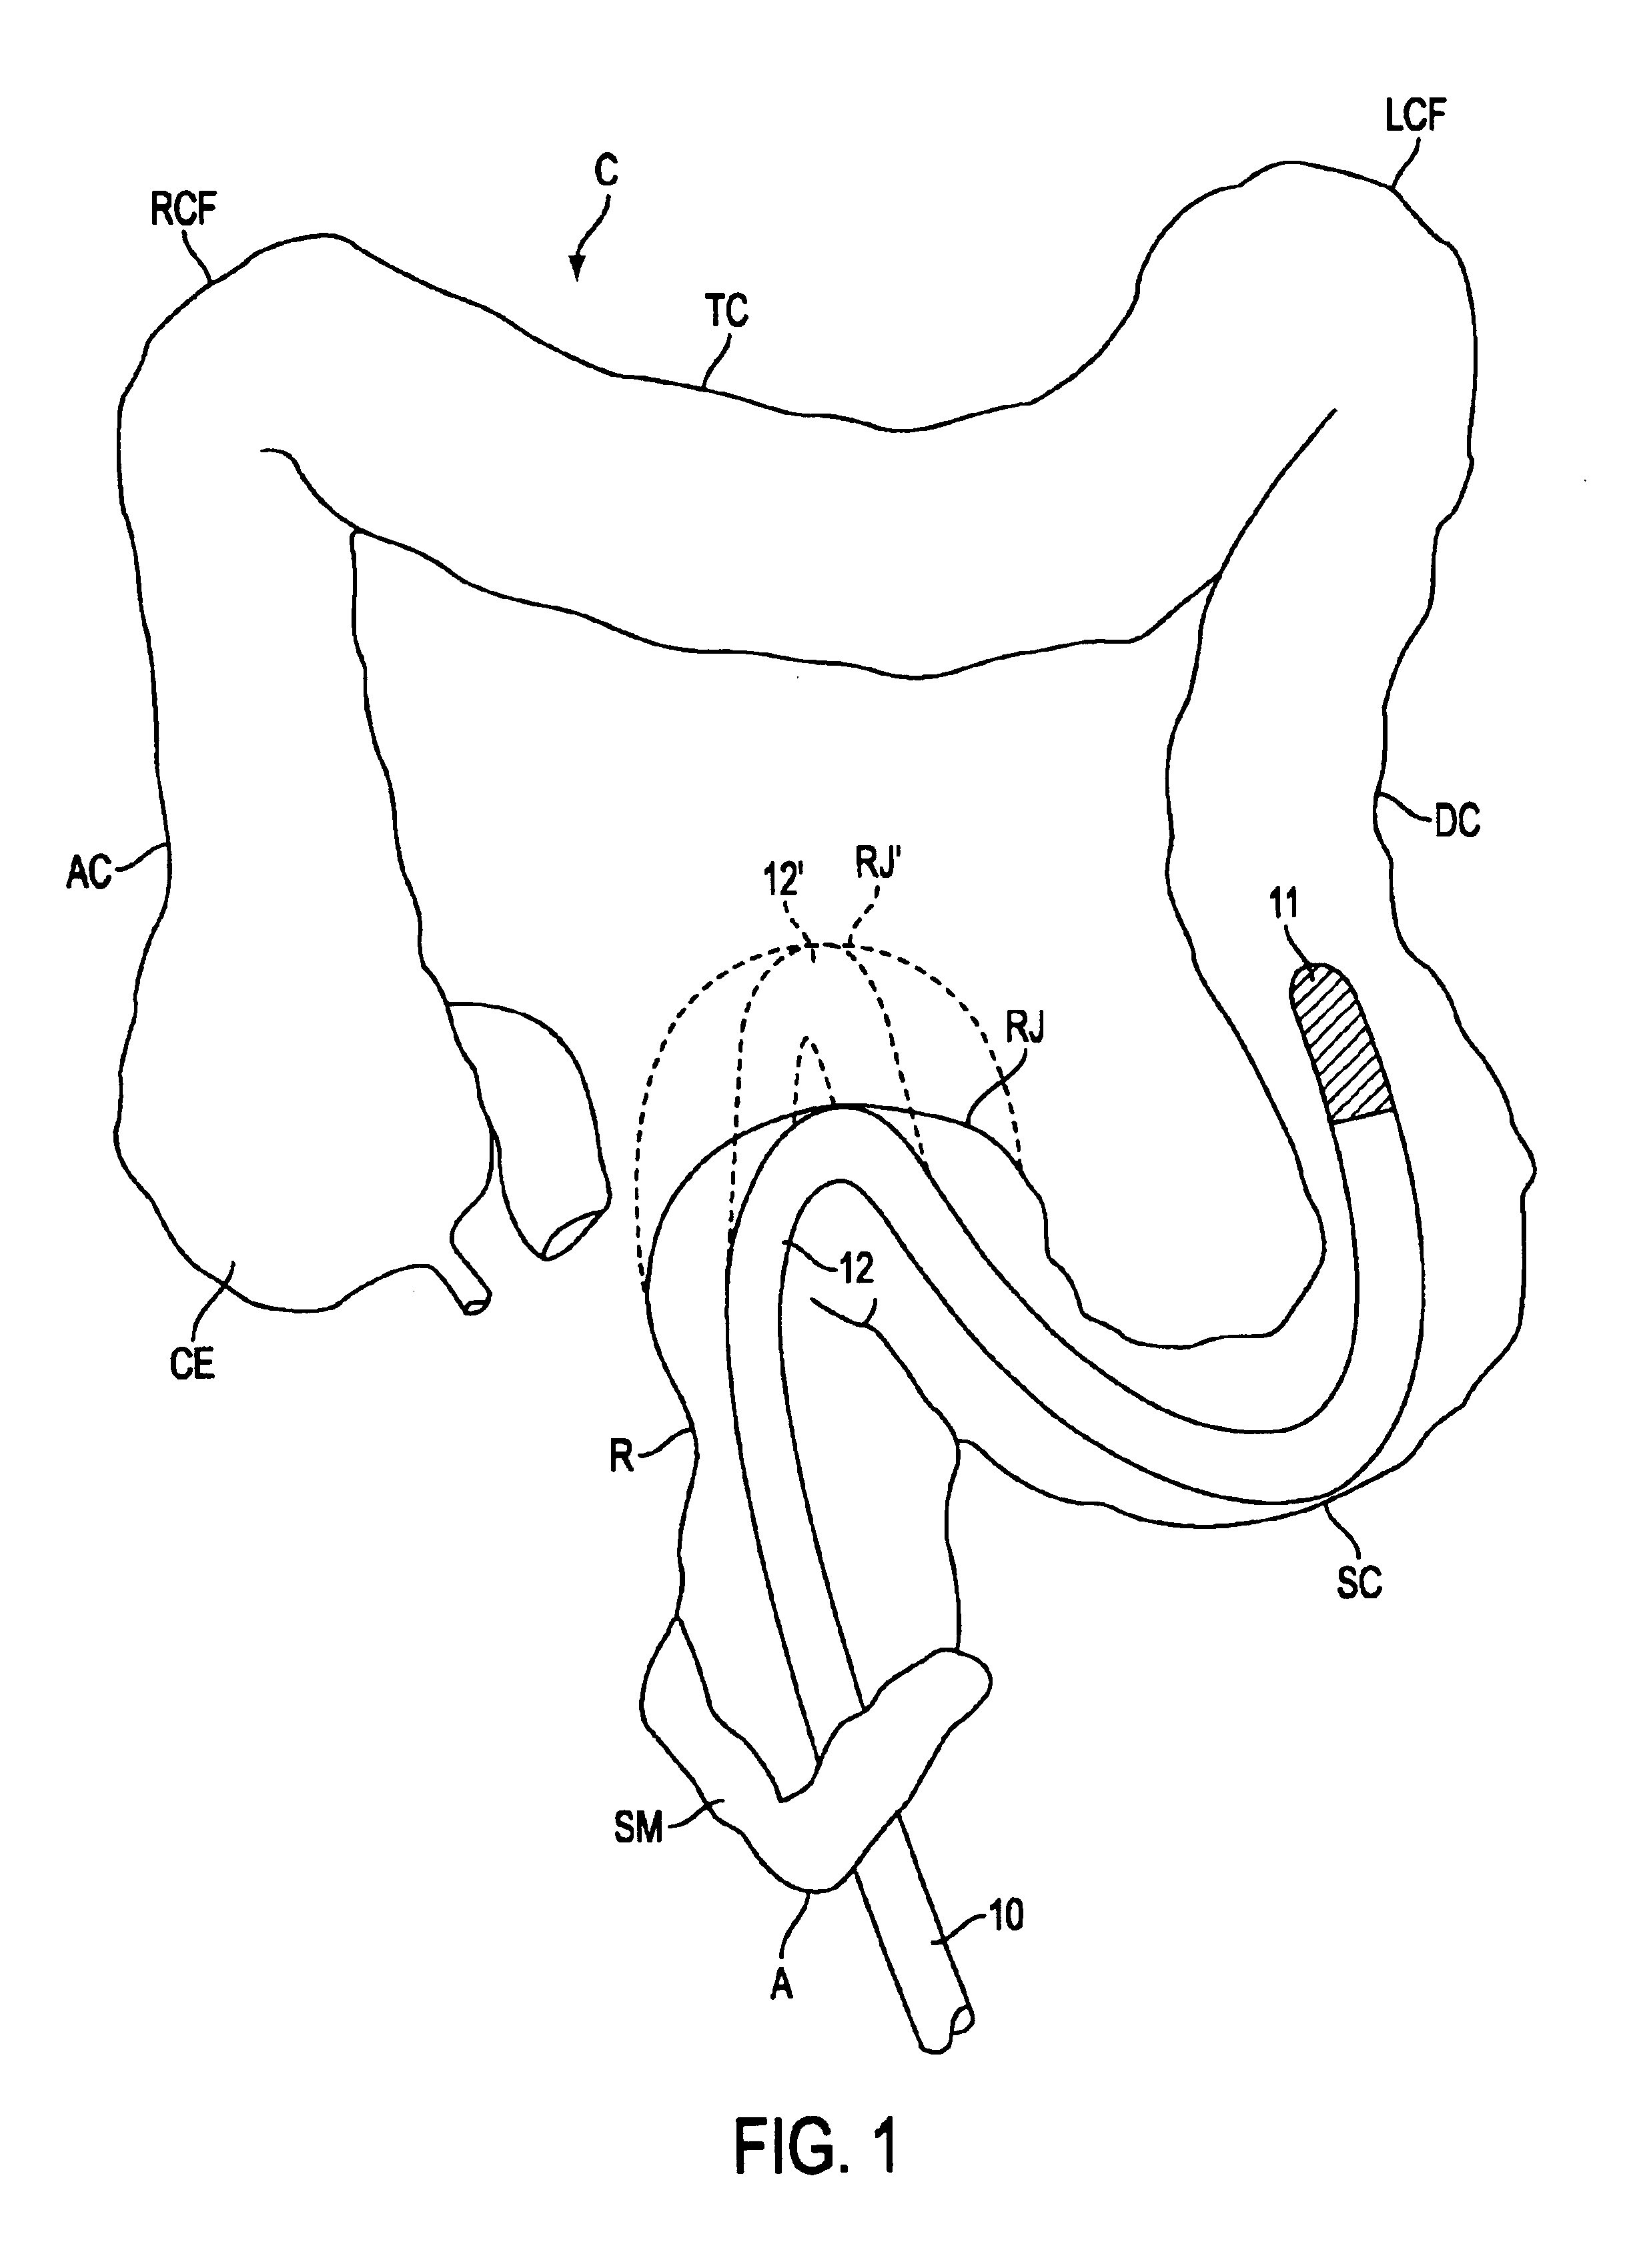 Shape lockable apparatus and method for advancing an instrument through unsupported anatomy